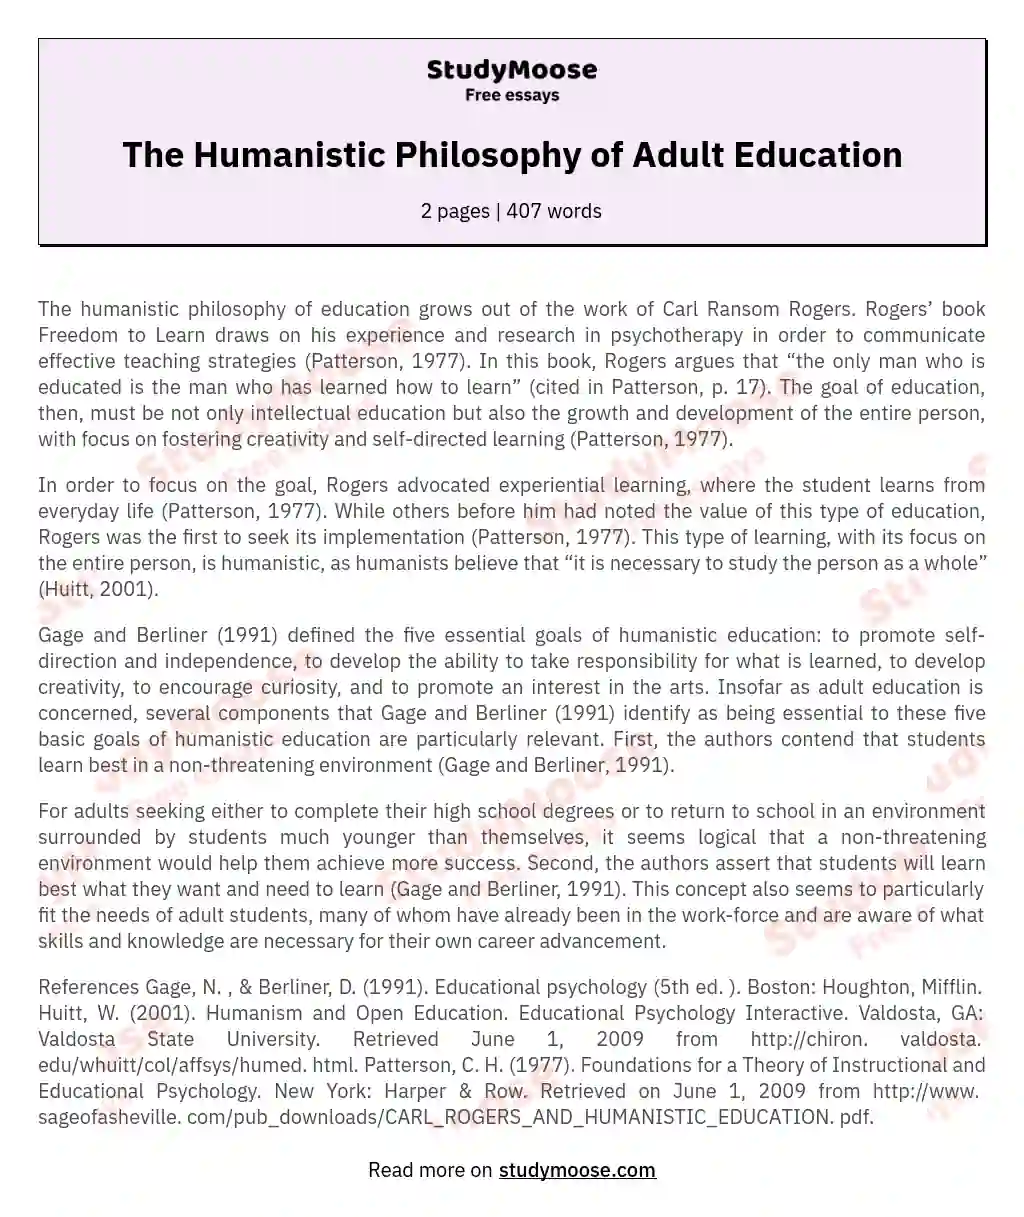 The Humanistic Philosophy of Adult Education essay